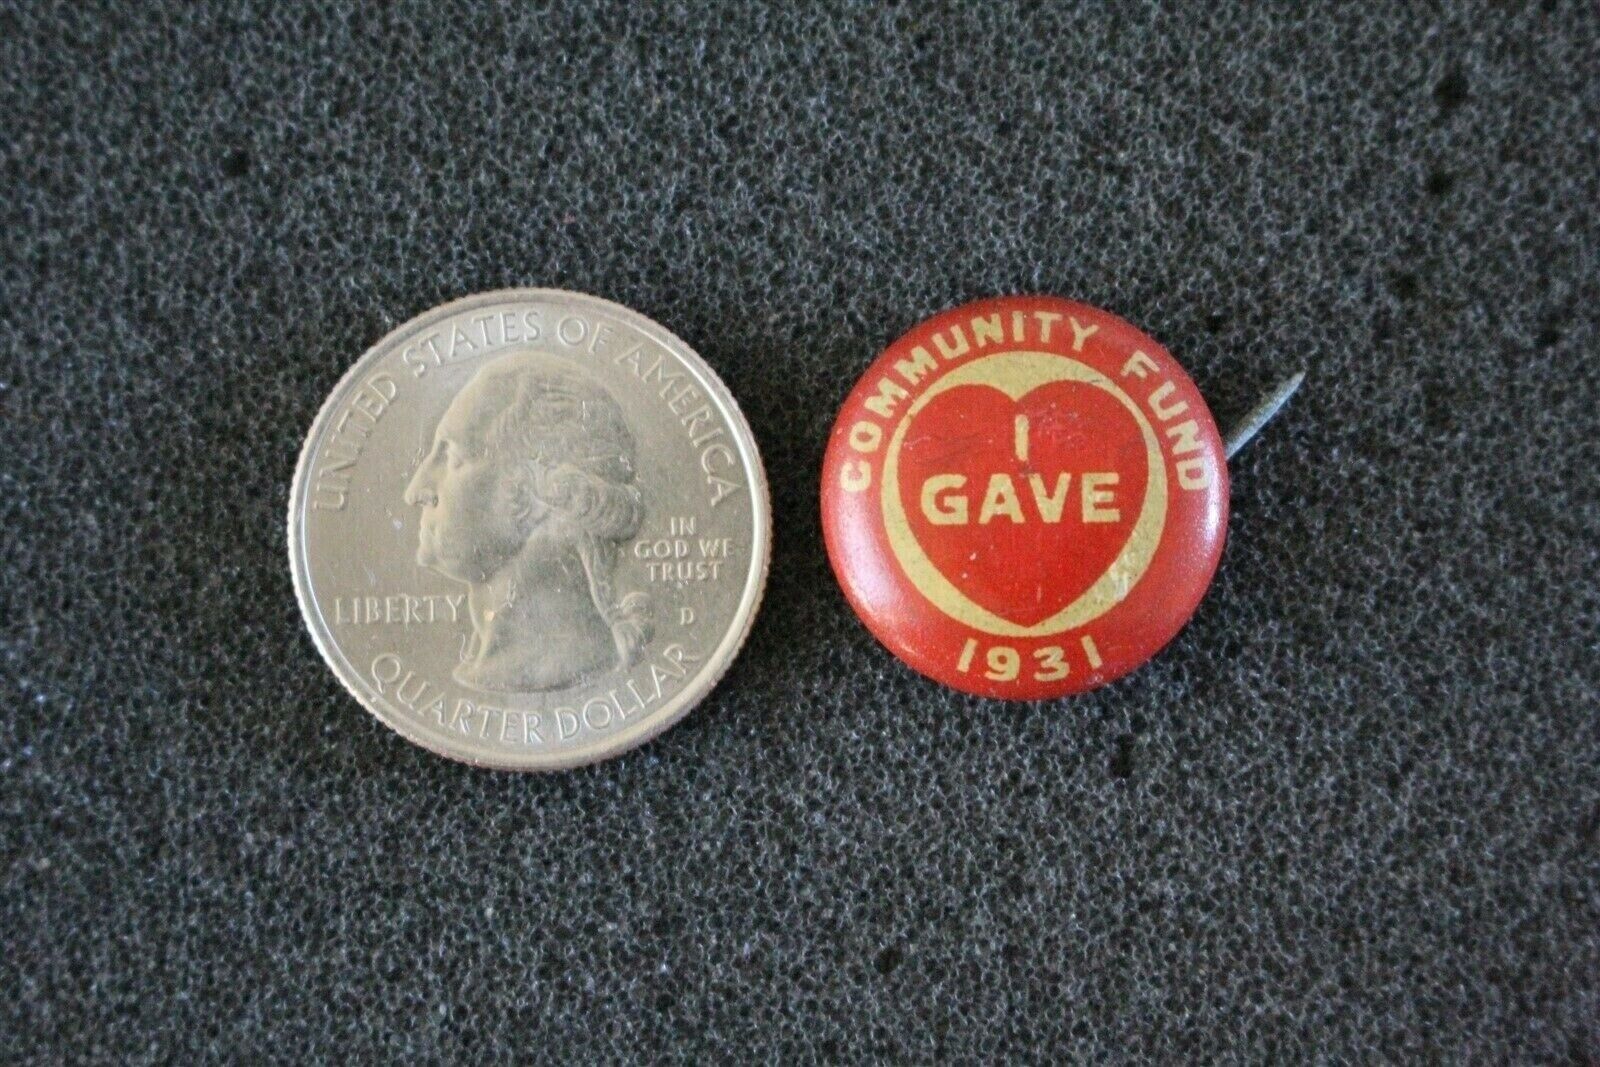 1931 I Gave Community Fund Vintage Heart Pin Pinback Button #22334